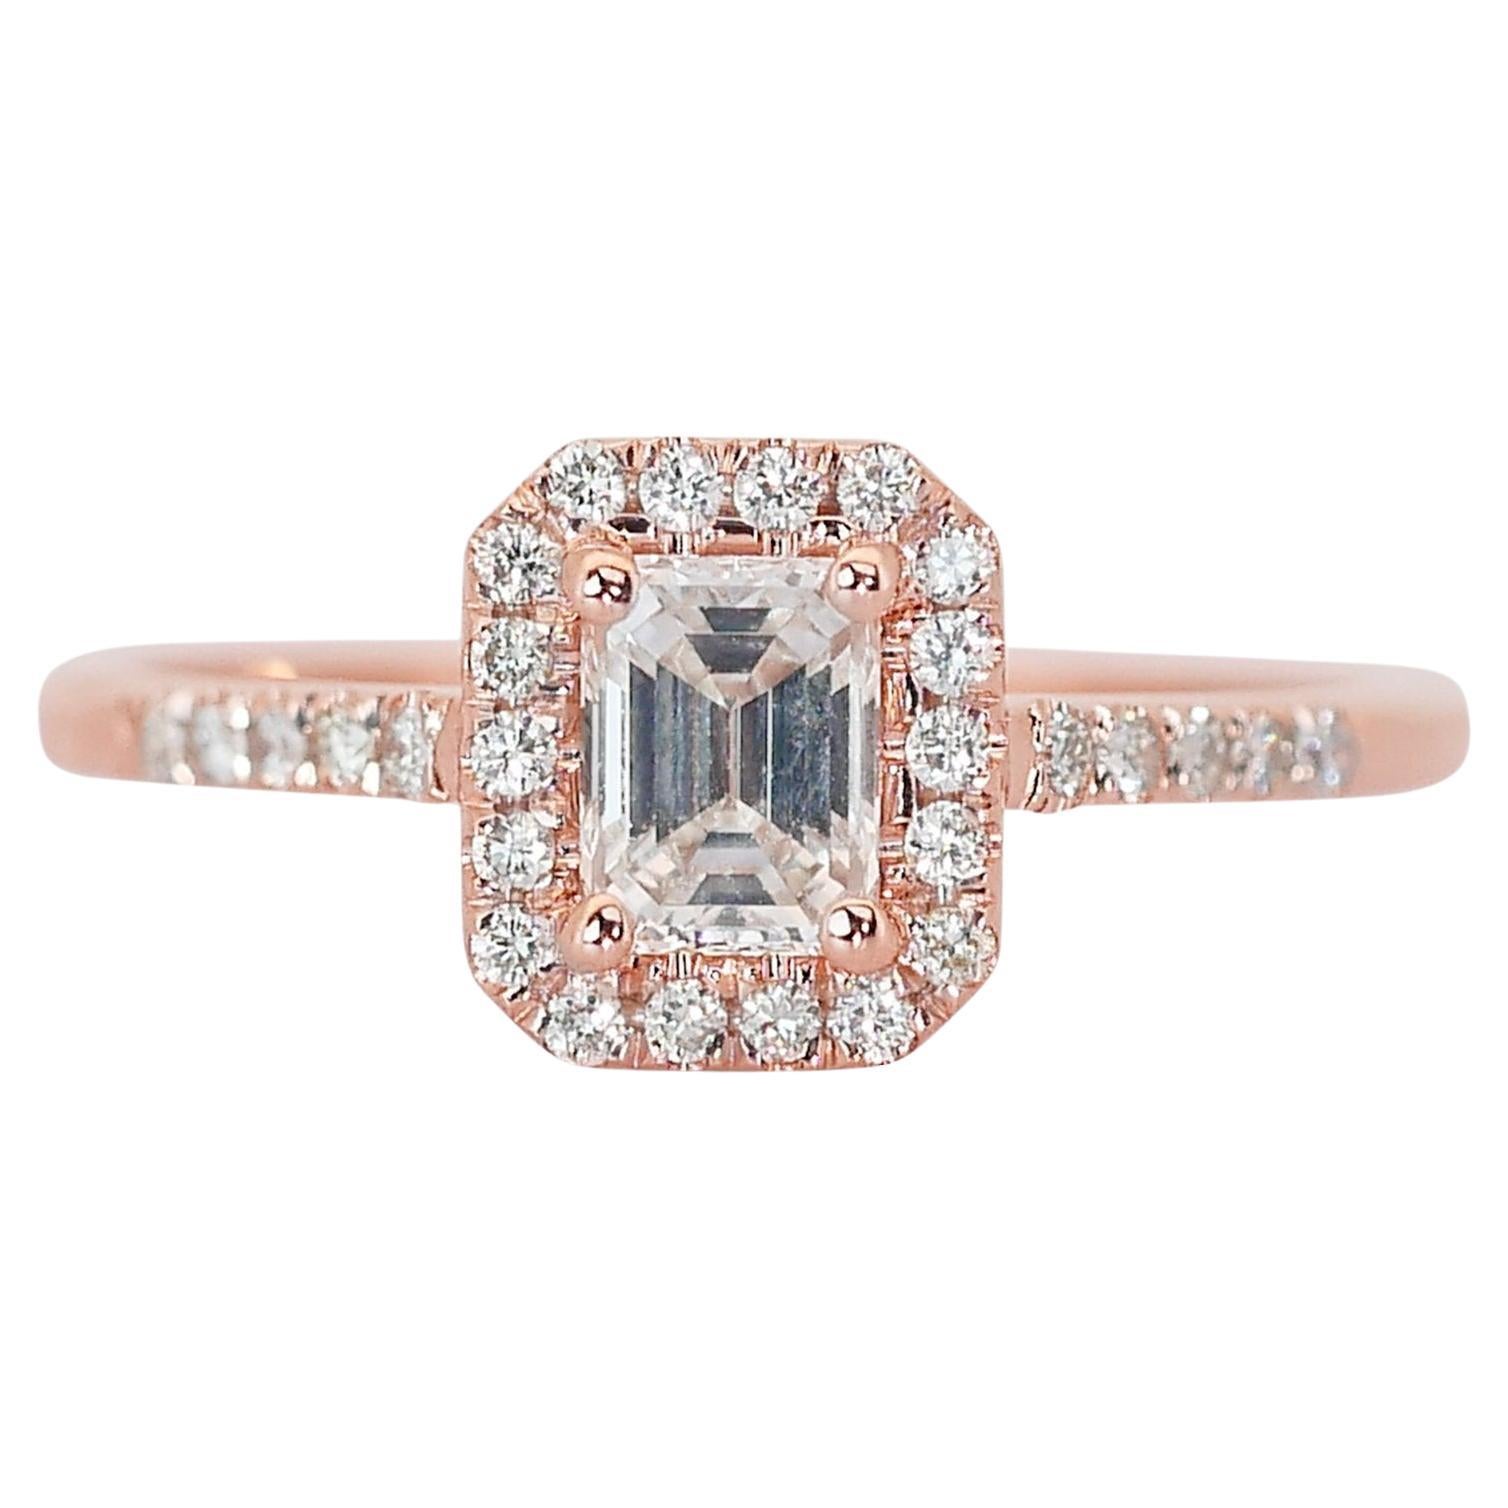 Captivating 0.90ct Diamonds Halo Ring in 18k Rose Gold - GIA Certified  For Sale